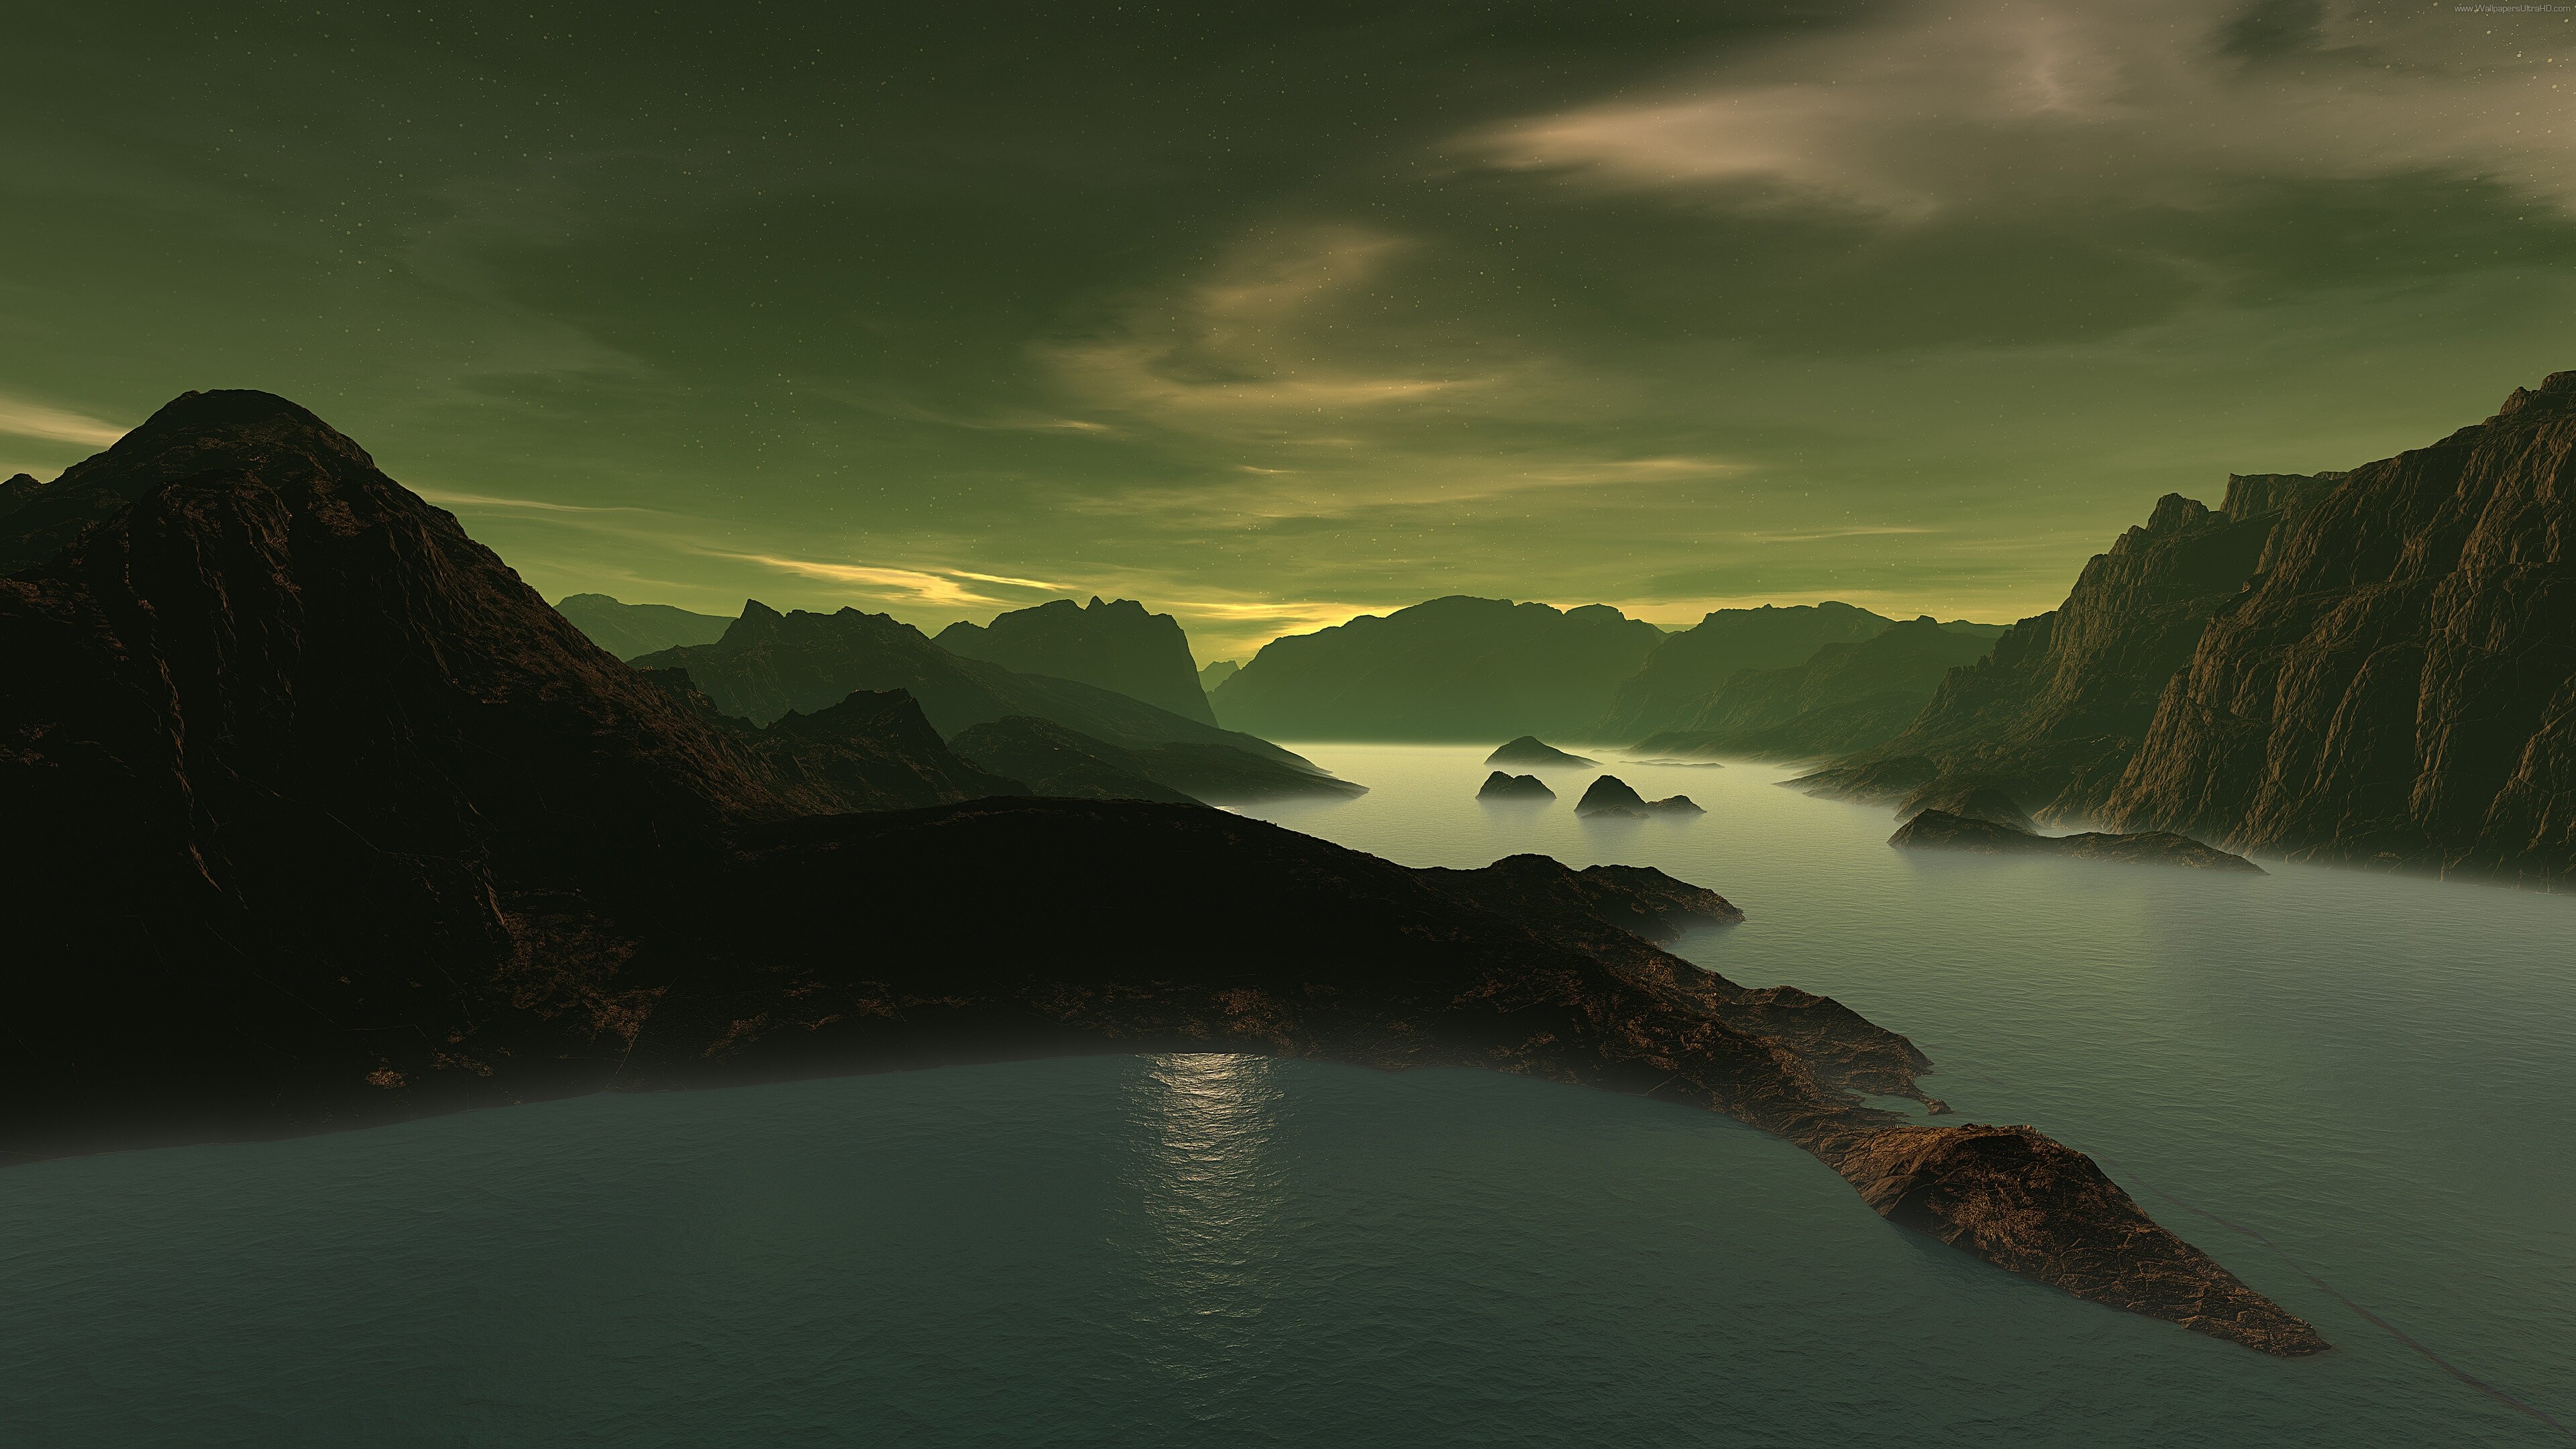 Go Green: The beauty of nature, Coastal and oceanic landforms, Untouched natural beauty. 3840x2160 4K Wallpaper.